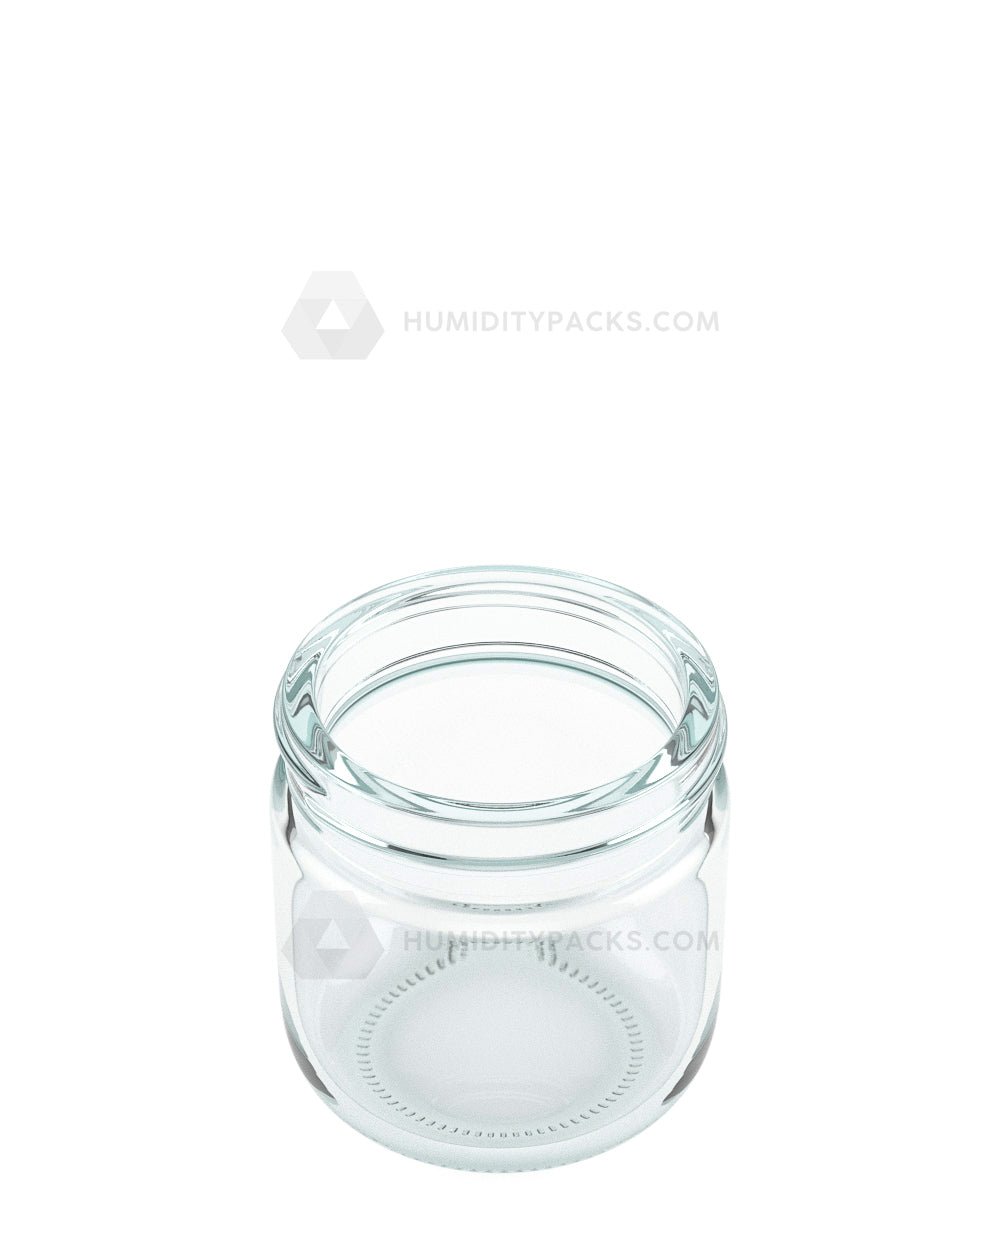 53mm Rounded Base Clear 2.5oz Glass Jar 32/Box Humidity Packs - 2